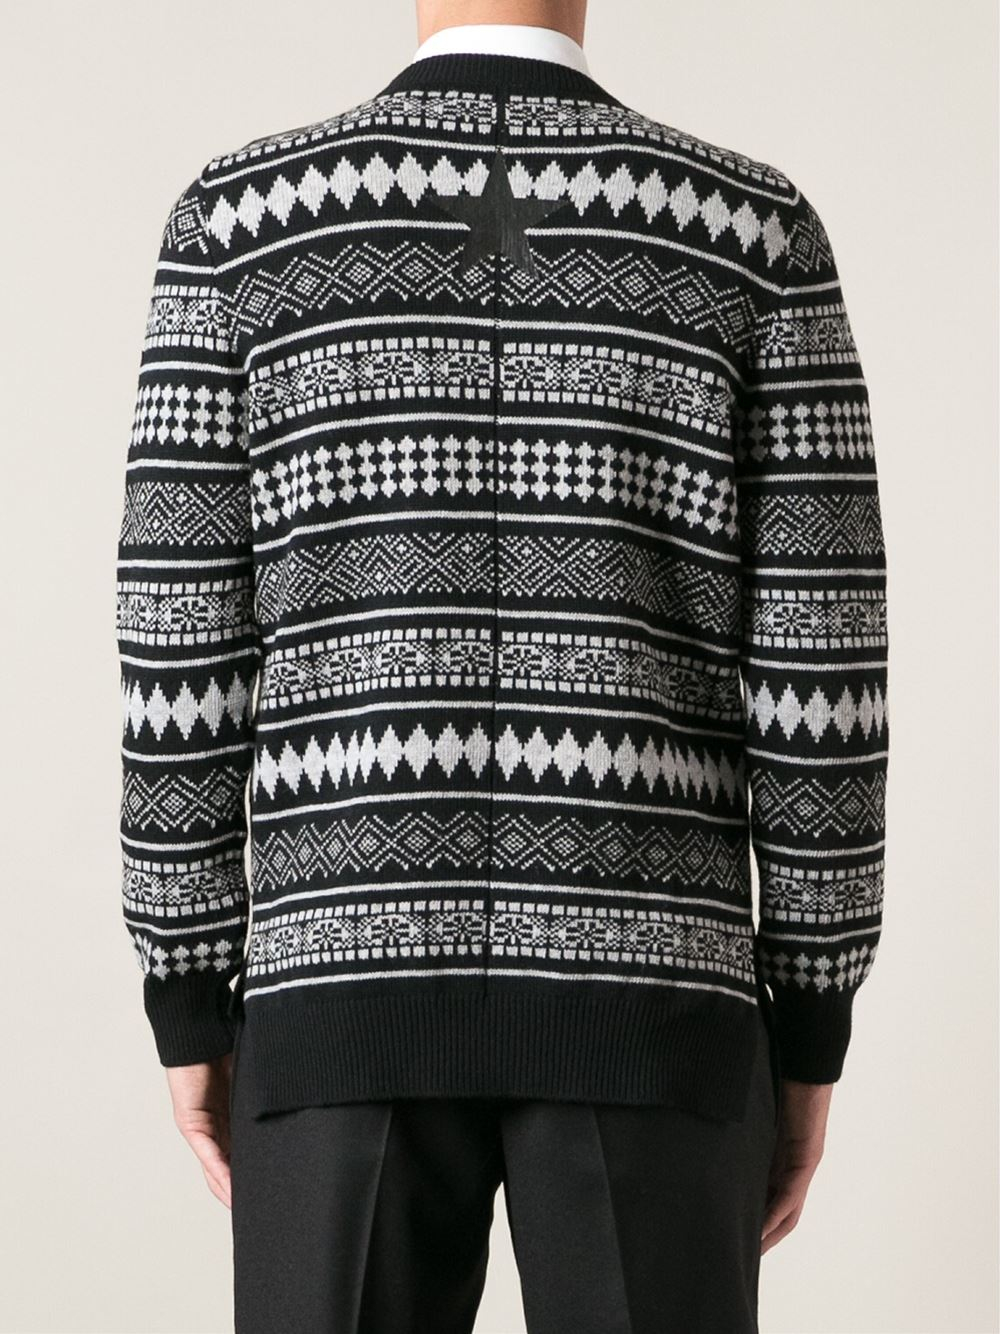 Givenchy Pattern Knit Sweater in Black for Men - Lyst